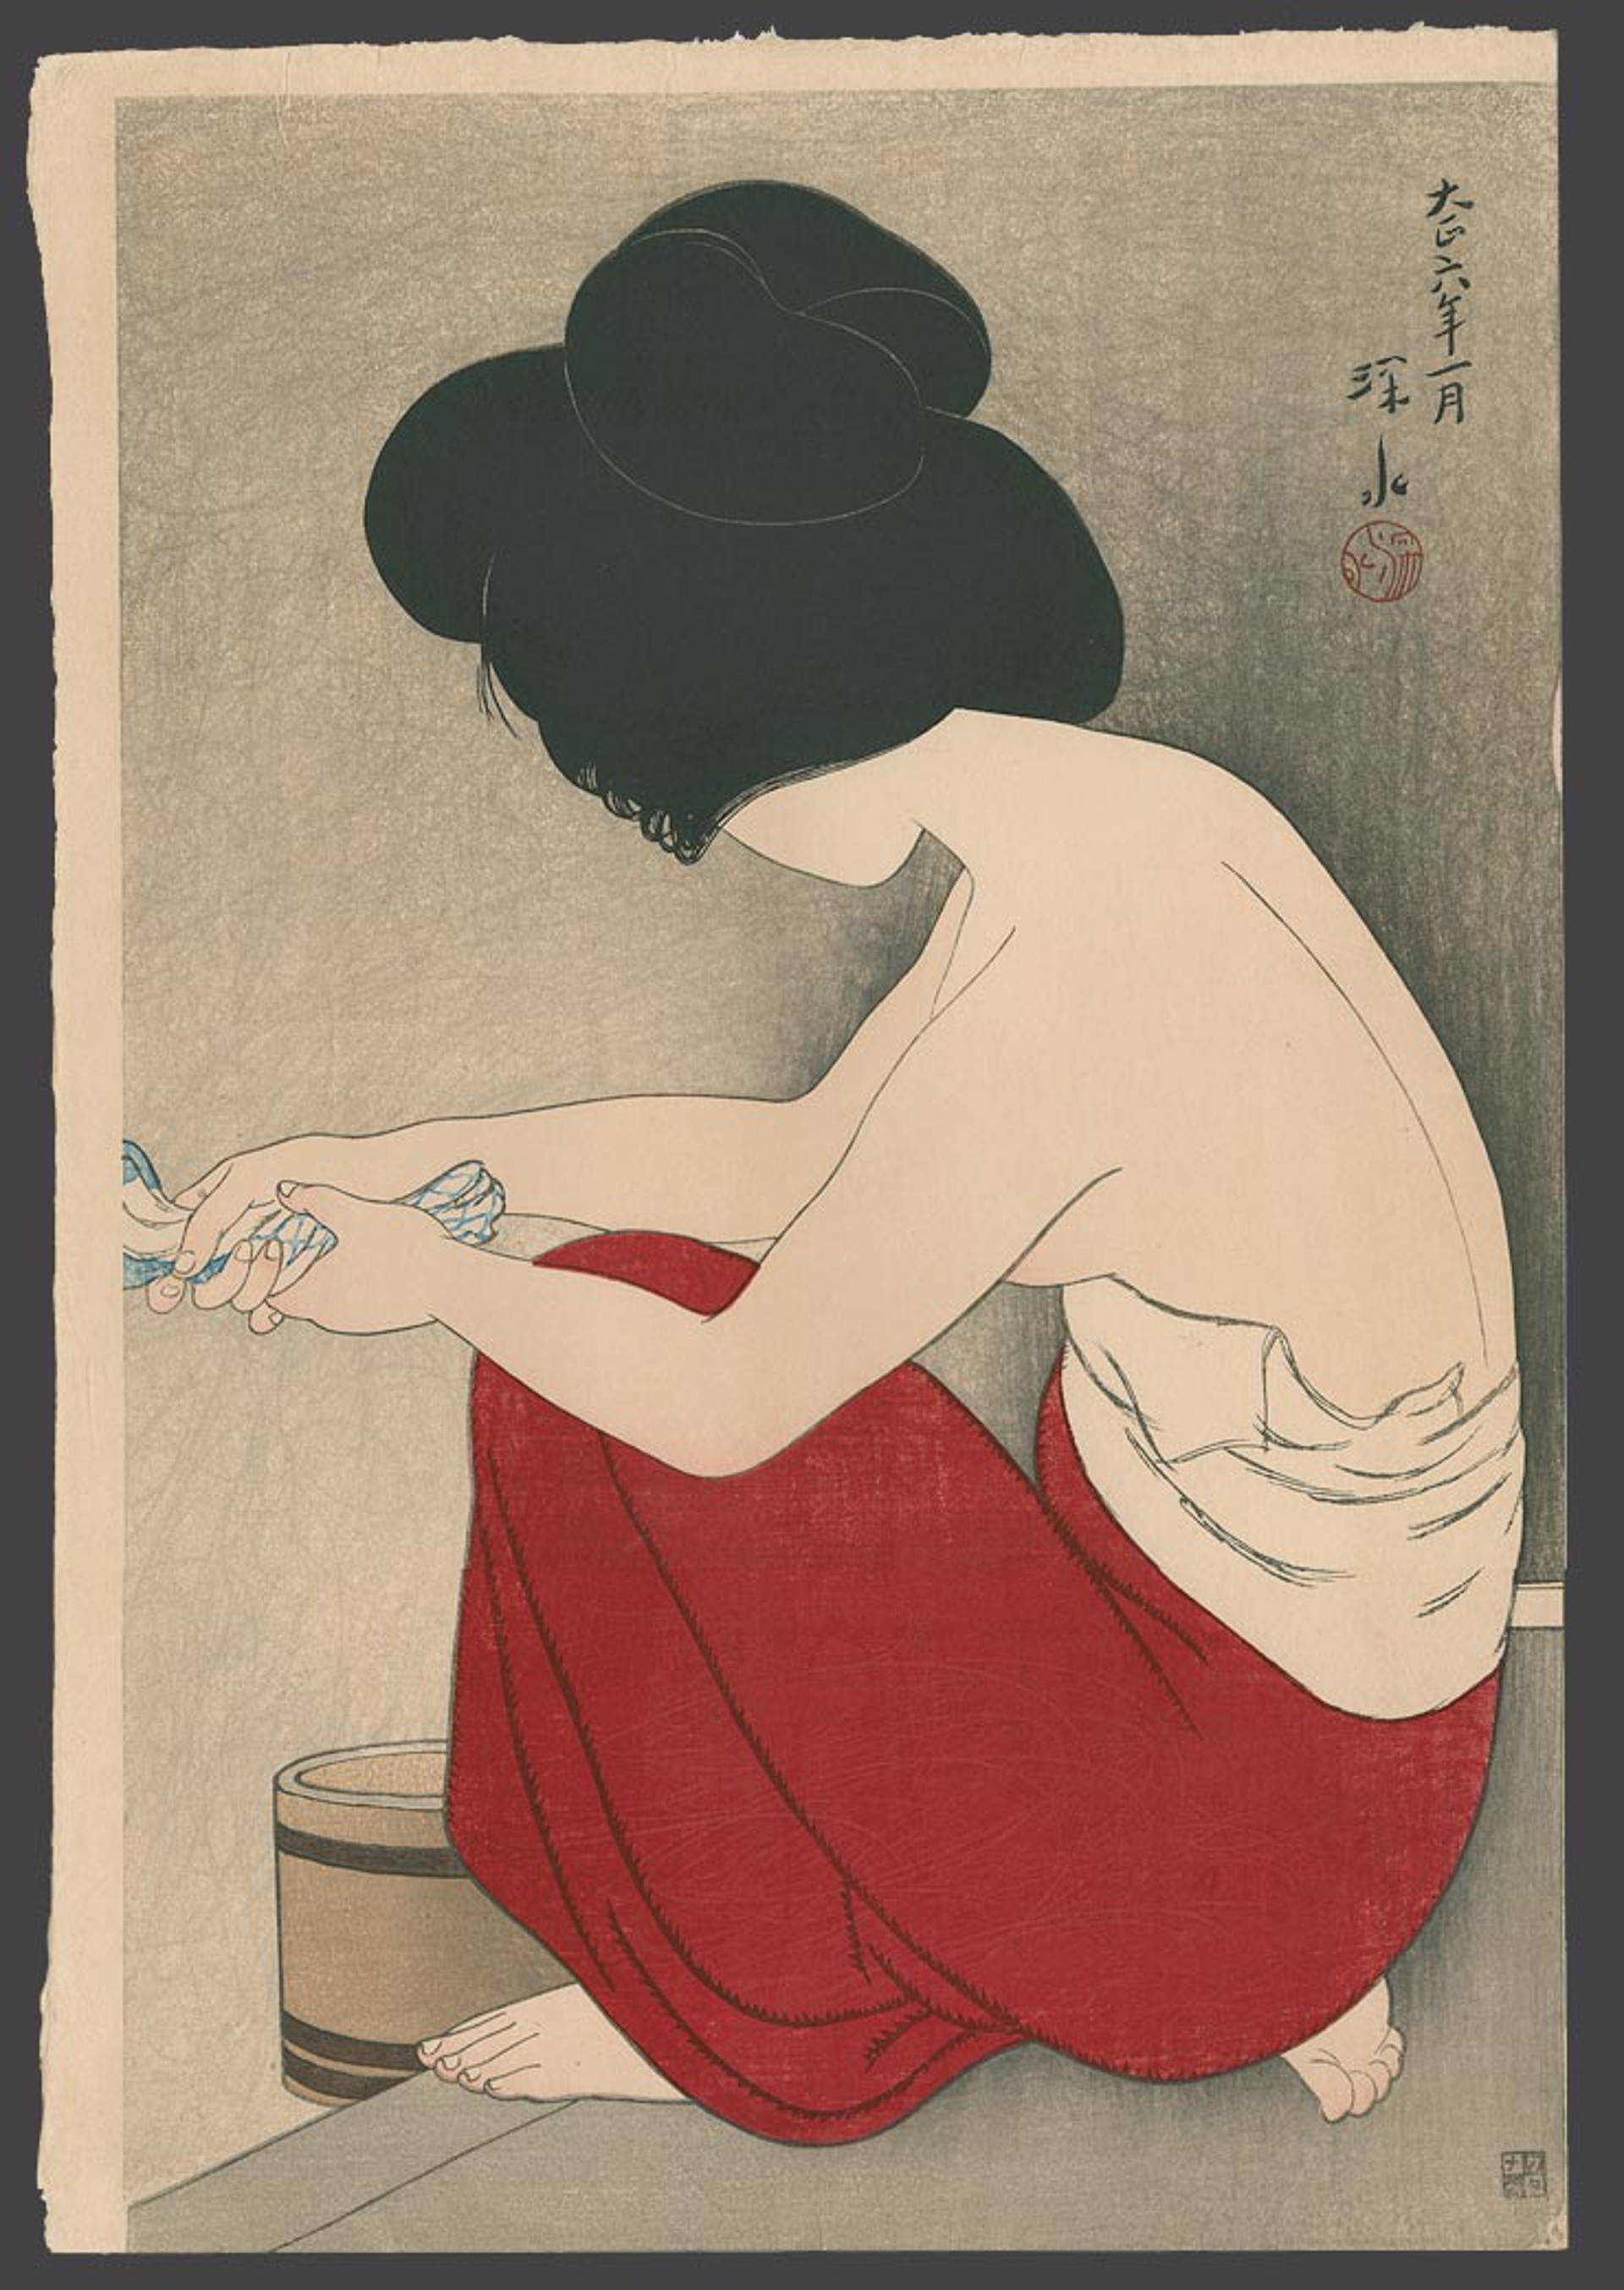 After the Bath by Shinsui